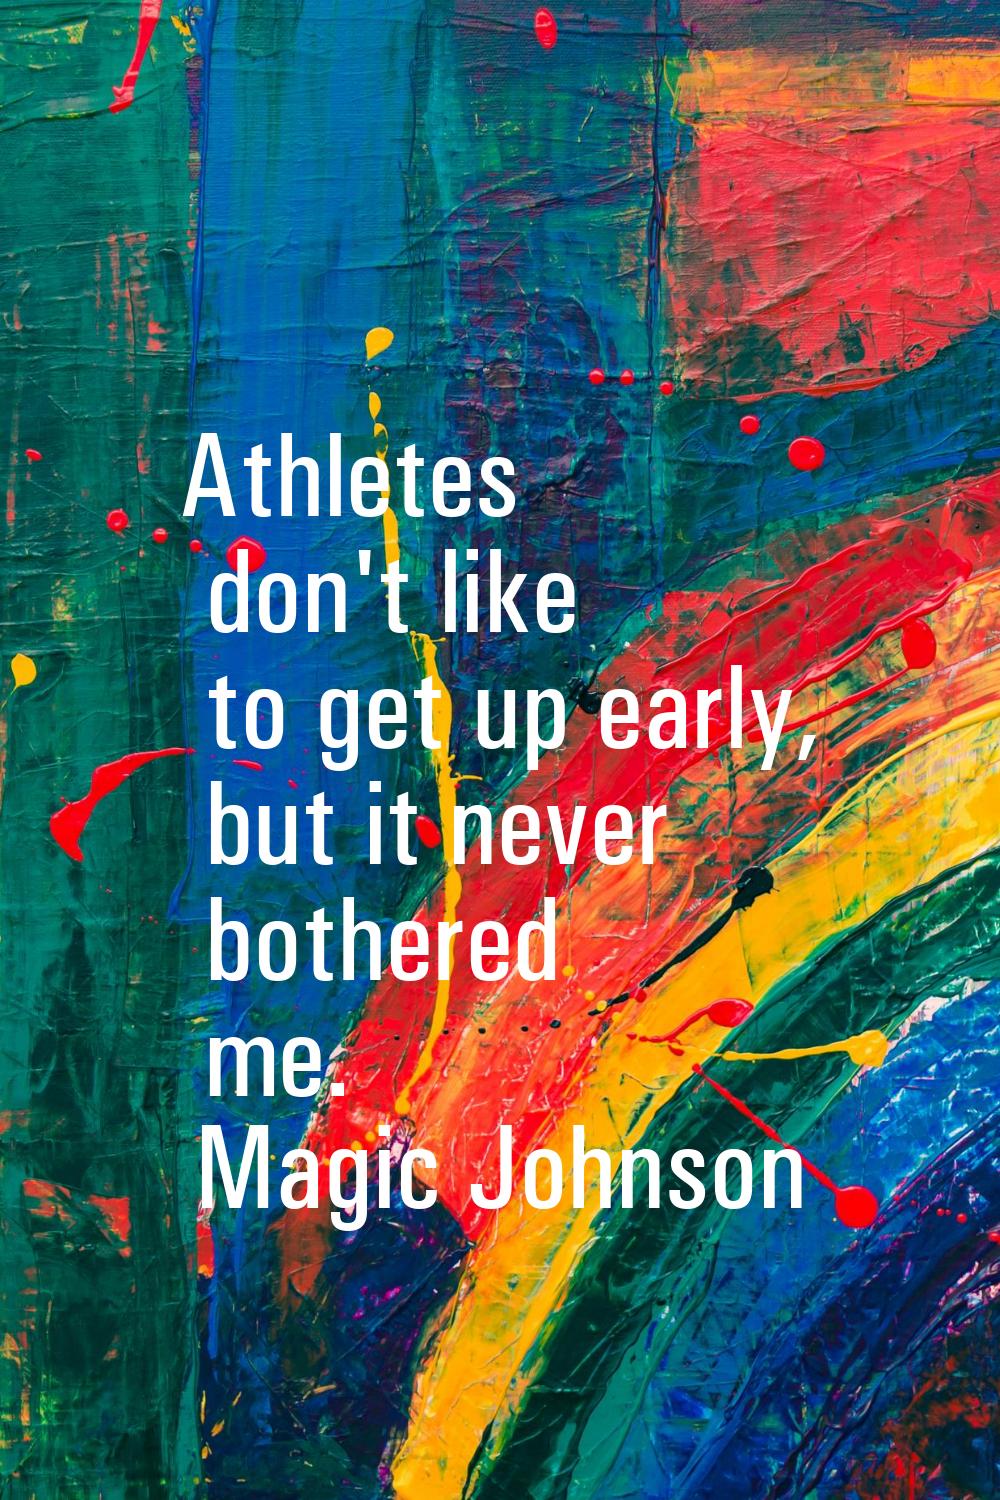 Athletes don't like to get up early, but it never bothered me.